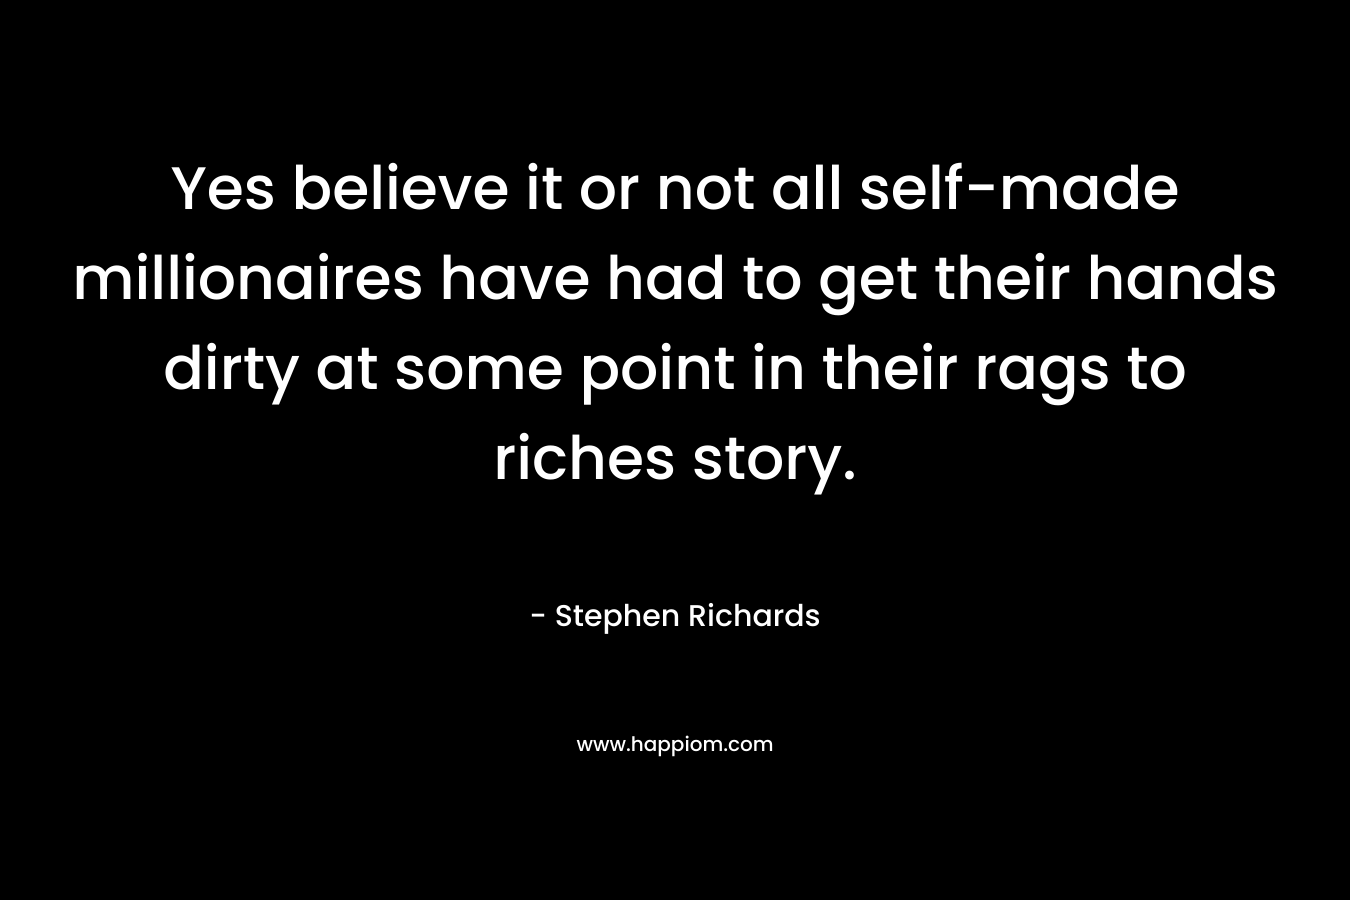 Yes believe it or not all self-made millionaires have had to get their hands dirty at some point in their rags to riches story.